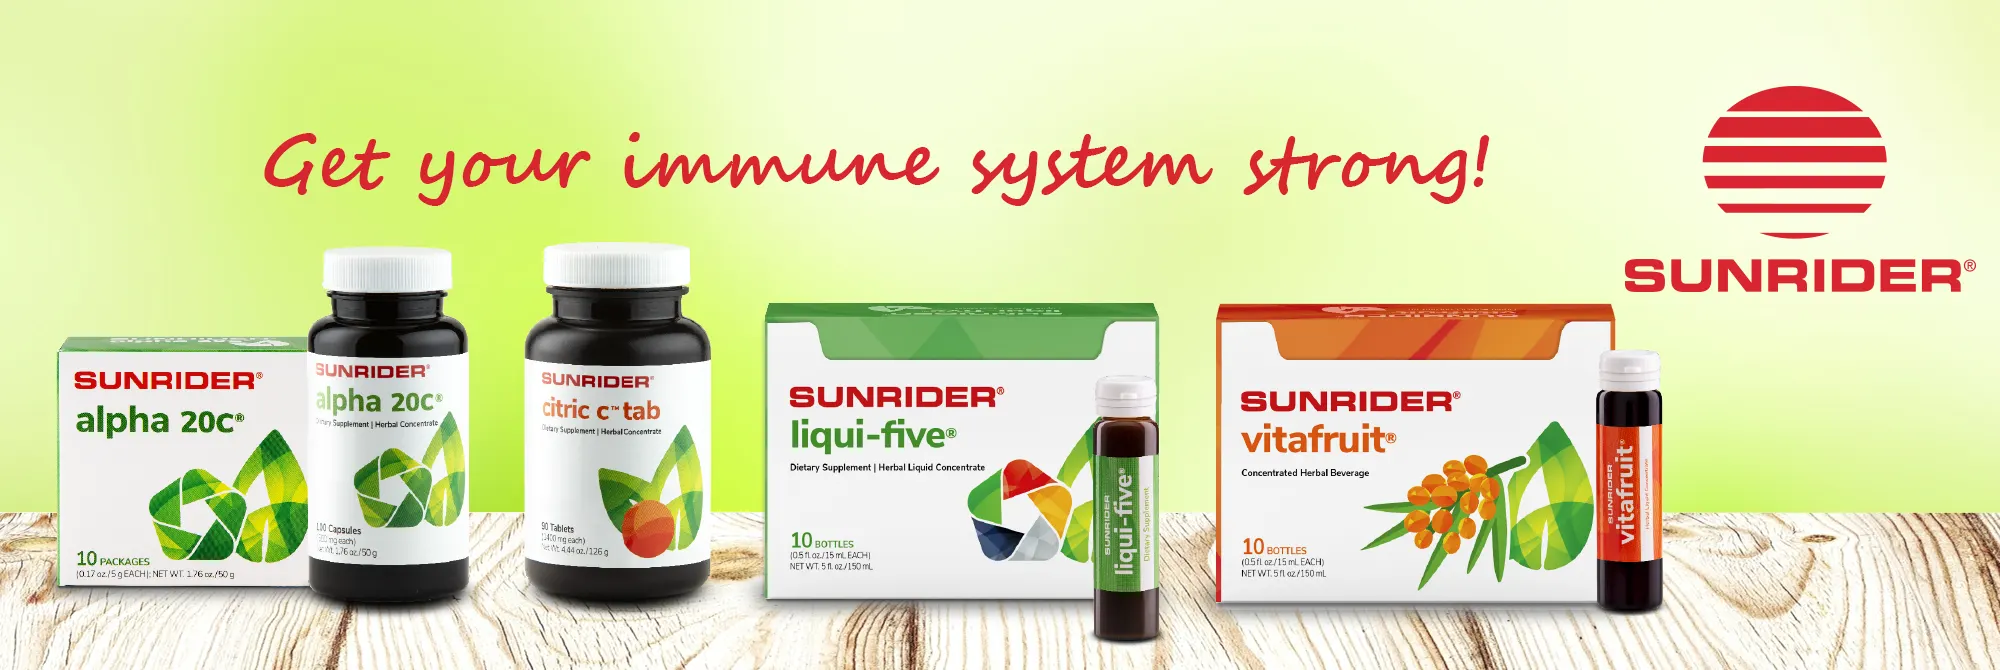 [HU-ENG] Get your immune system strong!